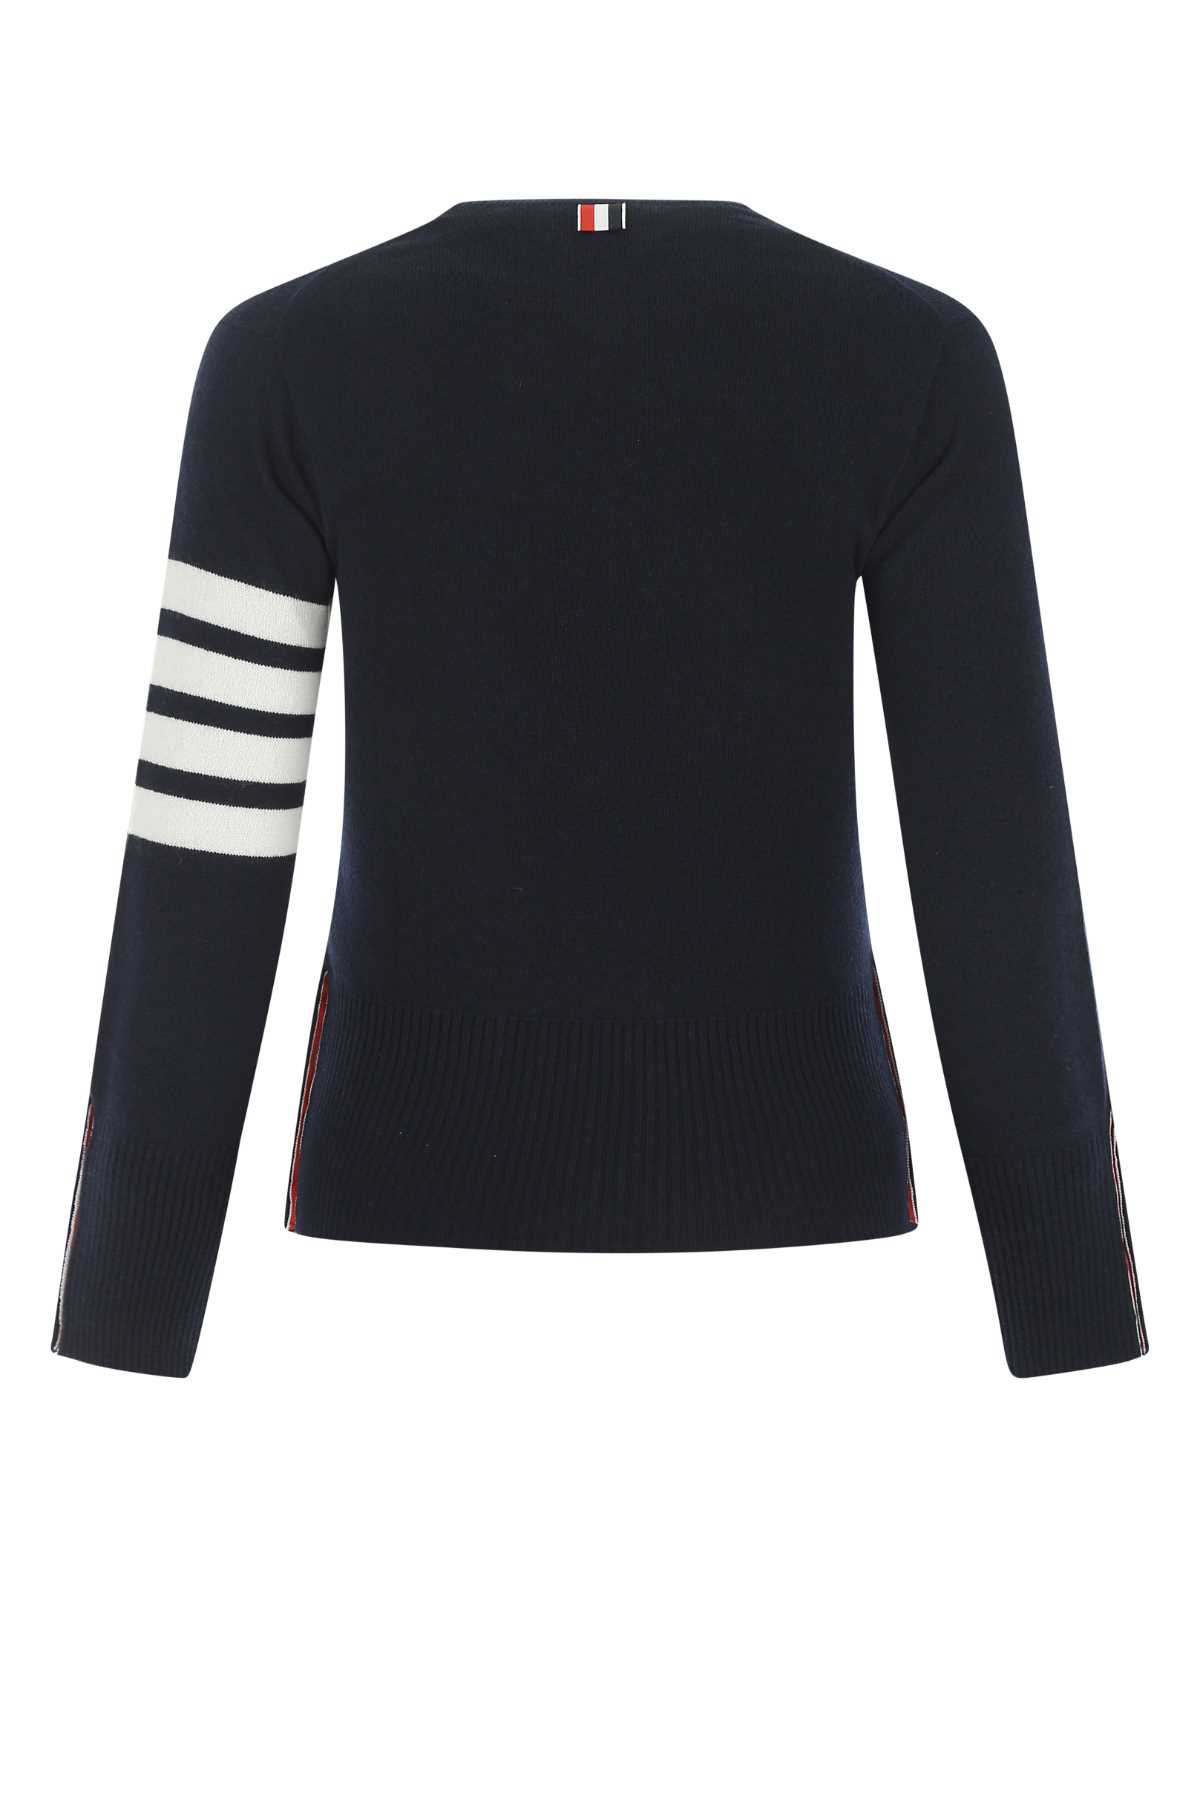 Shop Thom Browne Navy Blue Wool Sweater In 415